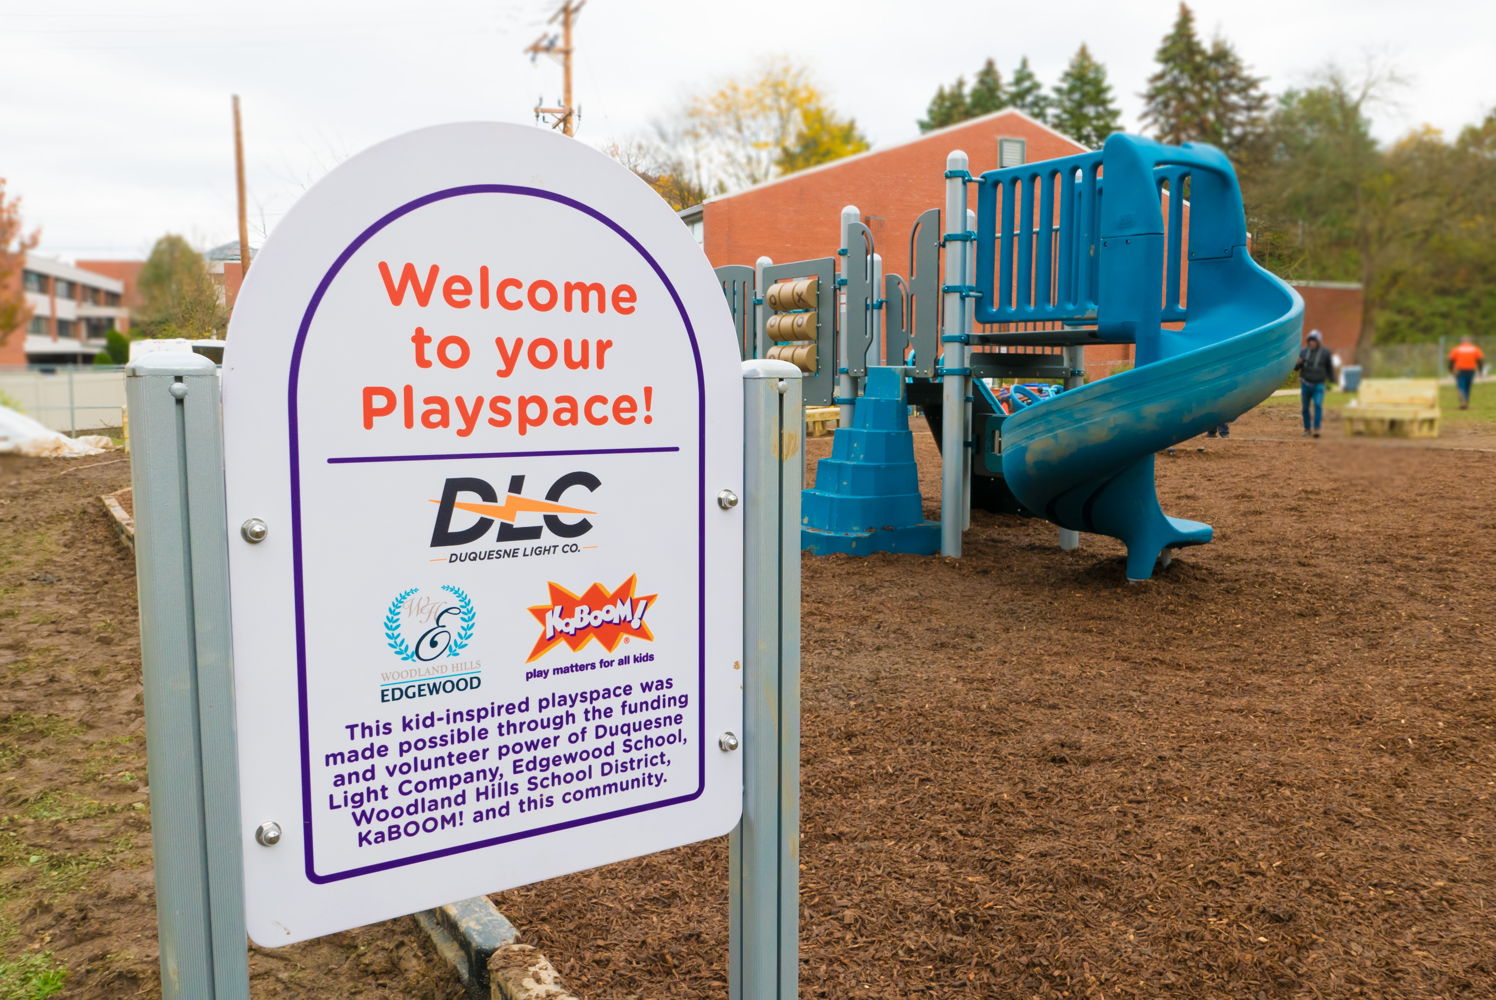 The playground will serve as a safe playspace for Edgewood children for years to come.